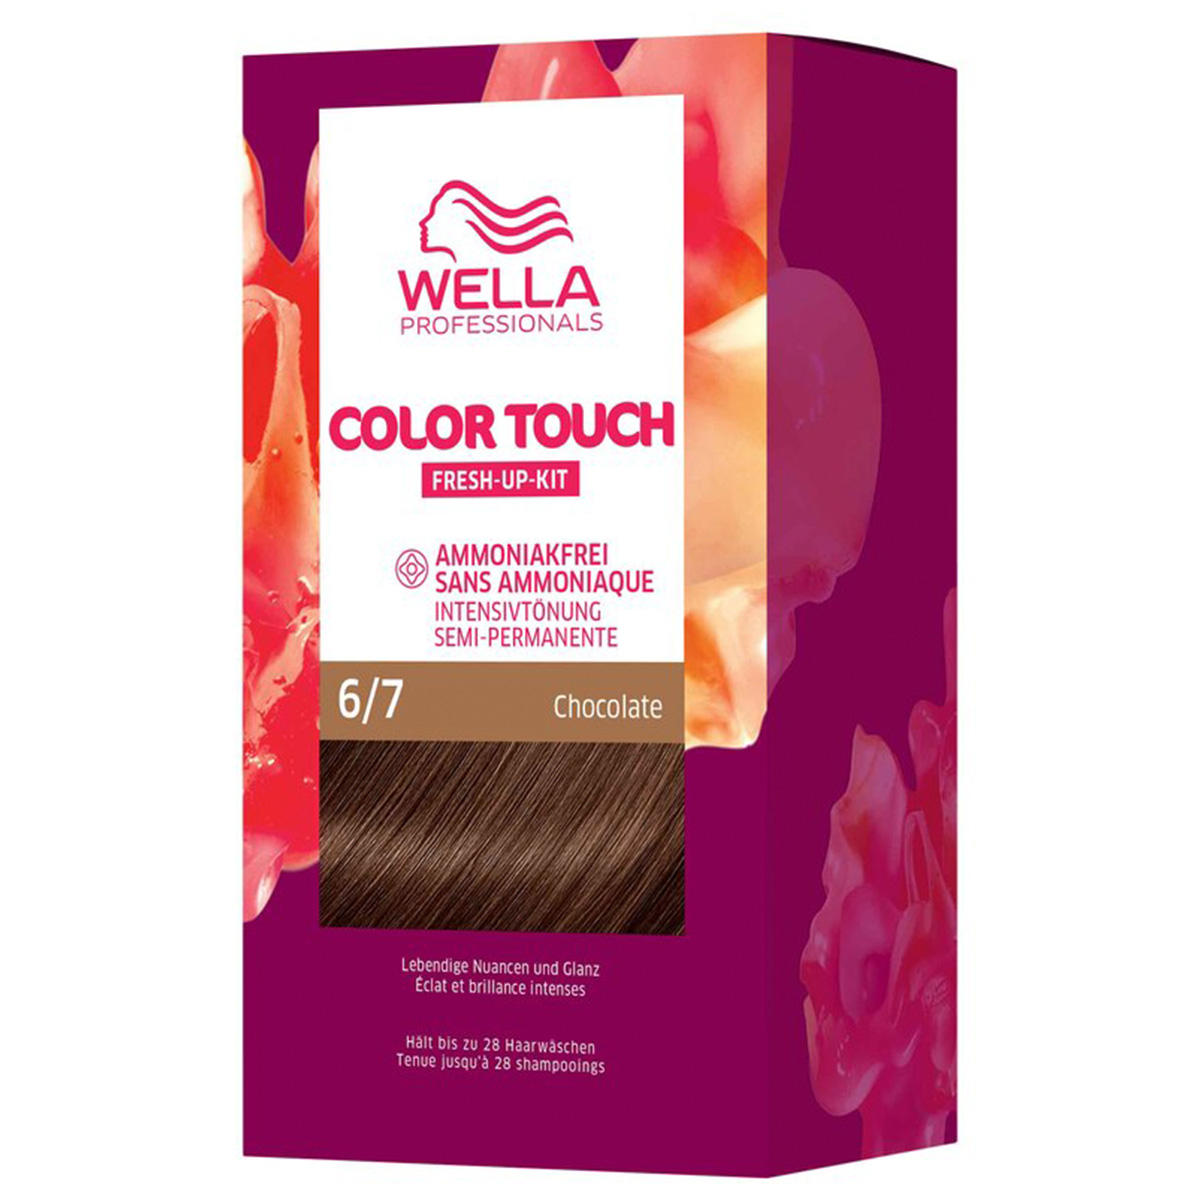 Wella Color Touch Fresh-Up-Kit 6/7 Castaño rubio oscuro 130 ml - 1